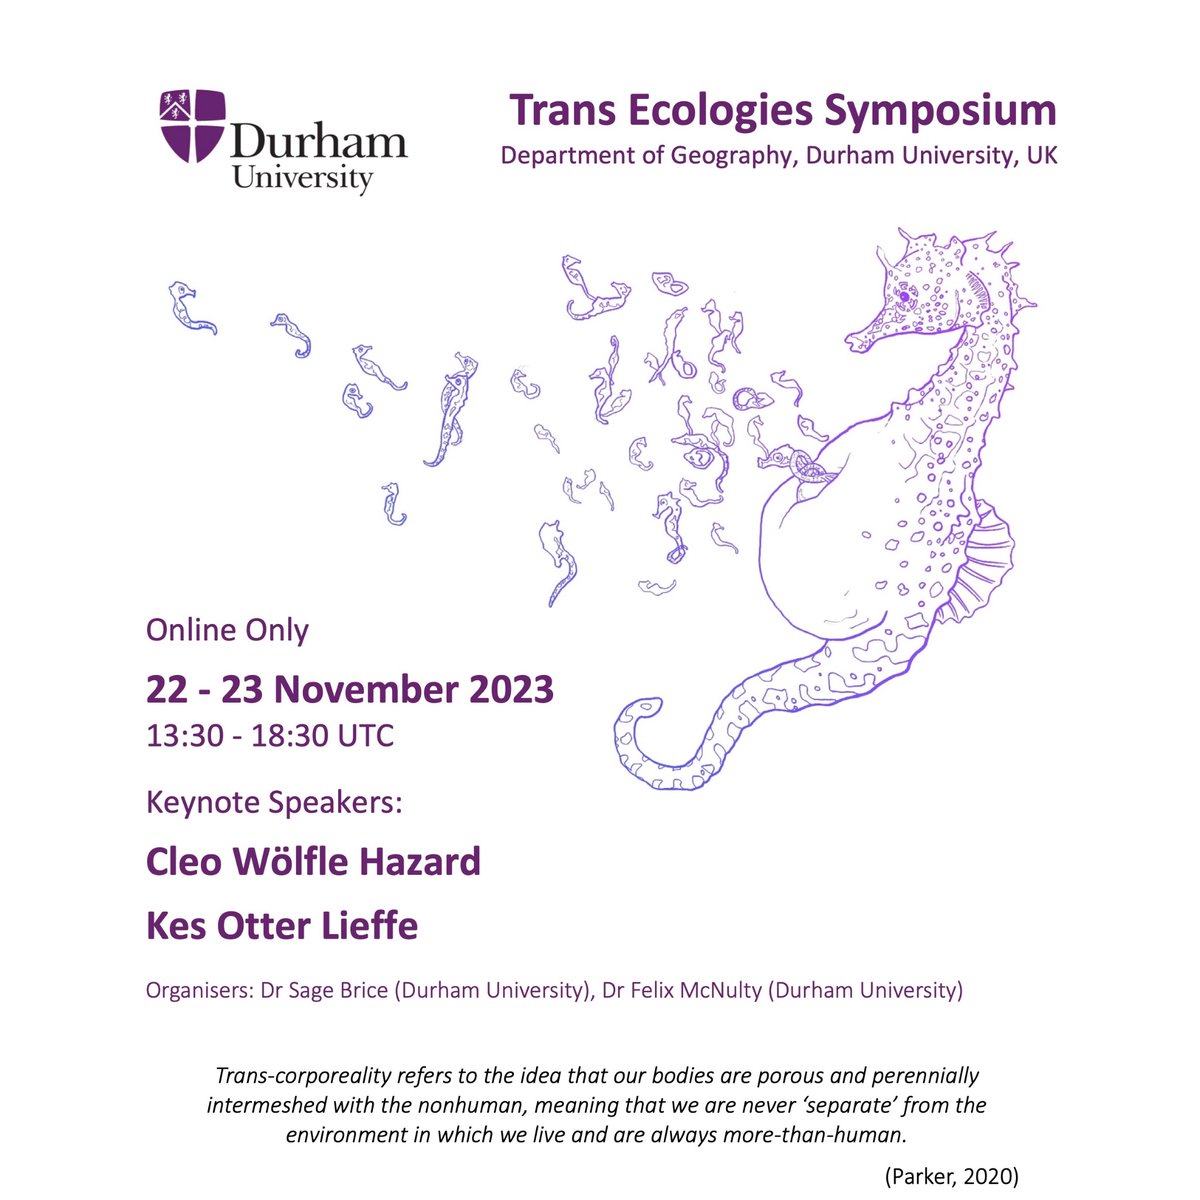 Delighted to say our CfP is out for a special journal section proceeding from the Durham Trans Ecologies Symposium. If you attended or contributed to the symposium (or the AAG panel that preceded it) and haven’t yet received a copy of the CfP, please get in touch! @GeogDurham